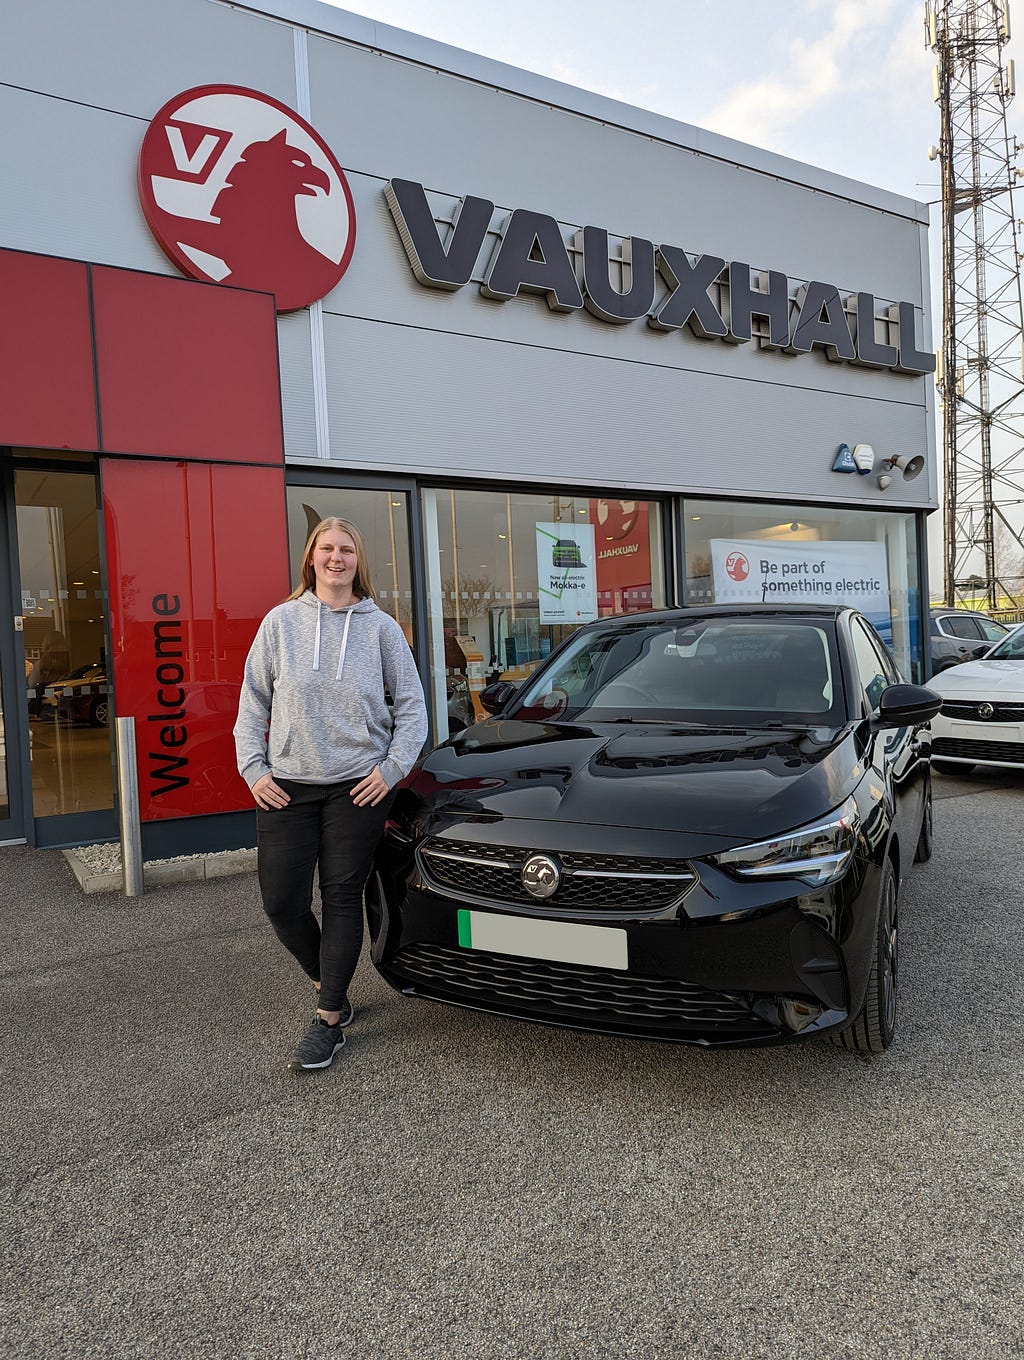 Sophie stood next to her Vauxhall Corsa-E outside the Vauxhall dealership.